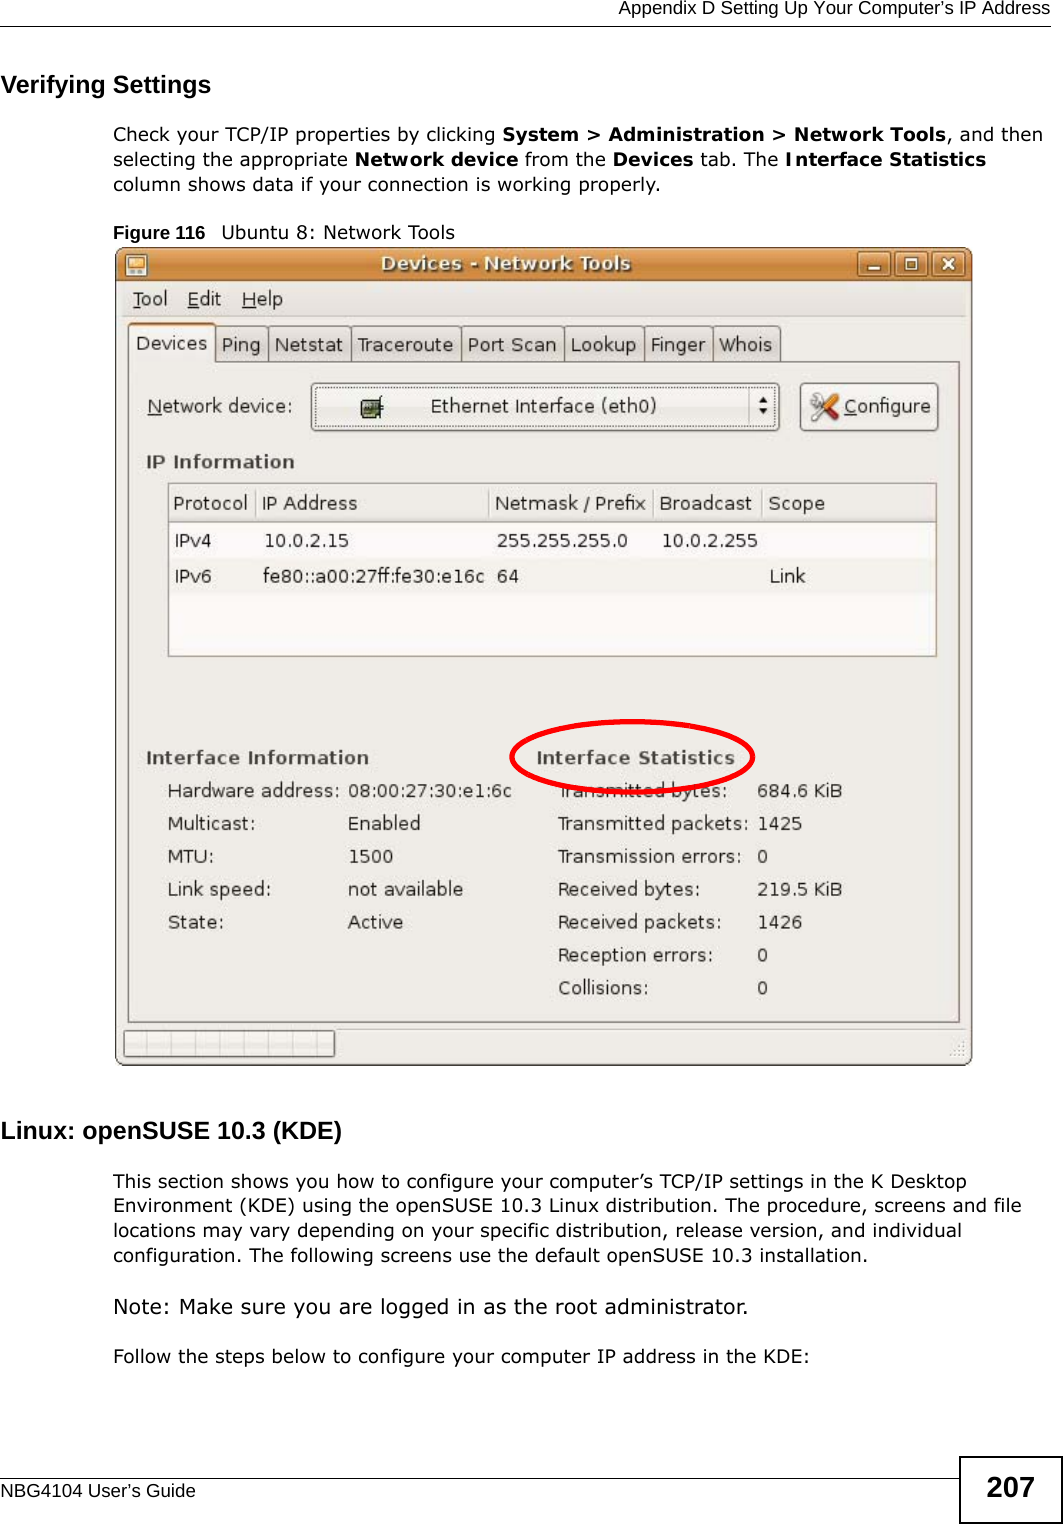  Appendix D Setting Up Your Computer’s IP AddressNBG4104 User’s Guide 207Verifying SettingsCheck your TCP/IP properties by clicking System &gt; Administration &gt; Network Tools, and then selecting the appropriate Network device from the Devices tab. The Interface Statistics column shows data if your connection is working properly.Figure 116   Ubuntu 8: Network ToolsLinux: openSUSE 10.3 (KDE)This section shows you how to configure your computer’s TCP/IP settings in the K Desktop Environment (KDE) using the openSUSE 10.3 Linux distribution. The procedure, screens and file locations may vary depending on your specific distribution, release version, and individual configuration. The following screens use the default openSUSE 10.3 installation.Note: Make sure you are logged in as the root administrator. Follow the steps below to configure your computer IP address in the KDE: